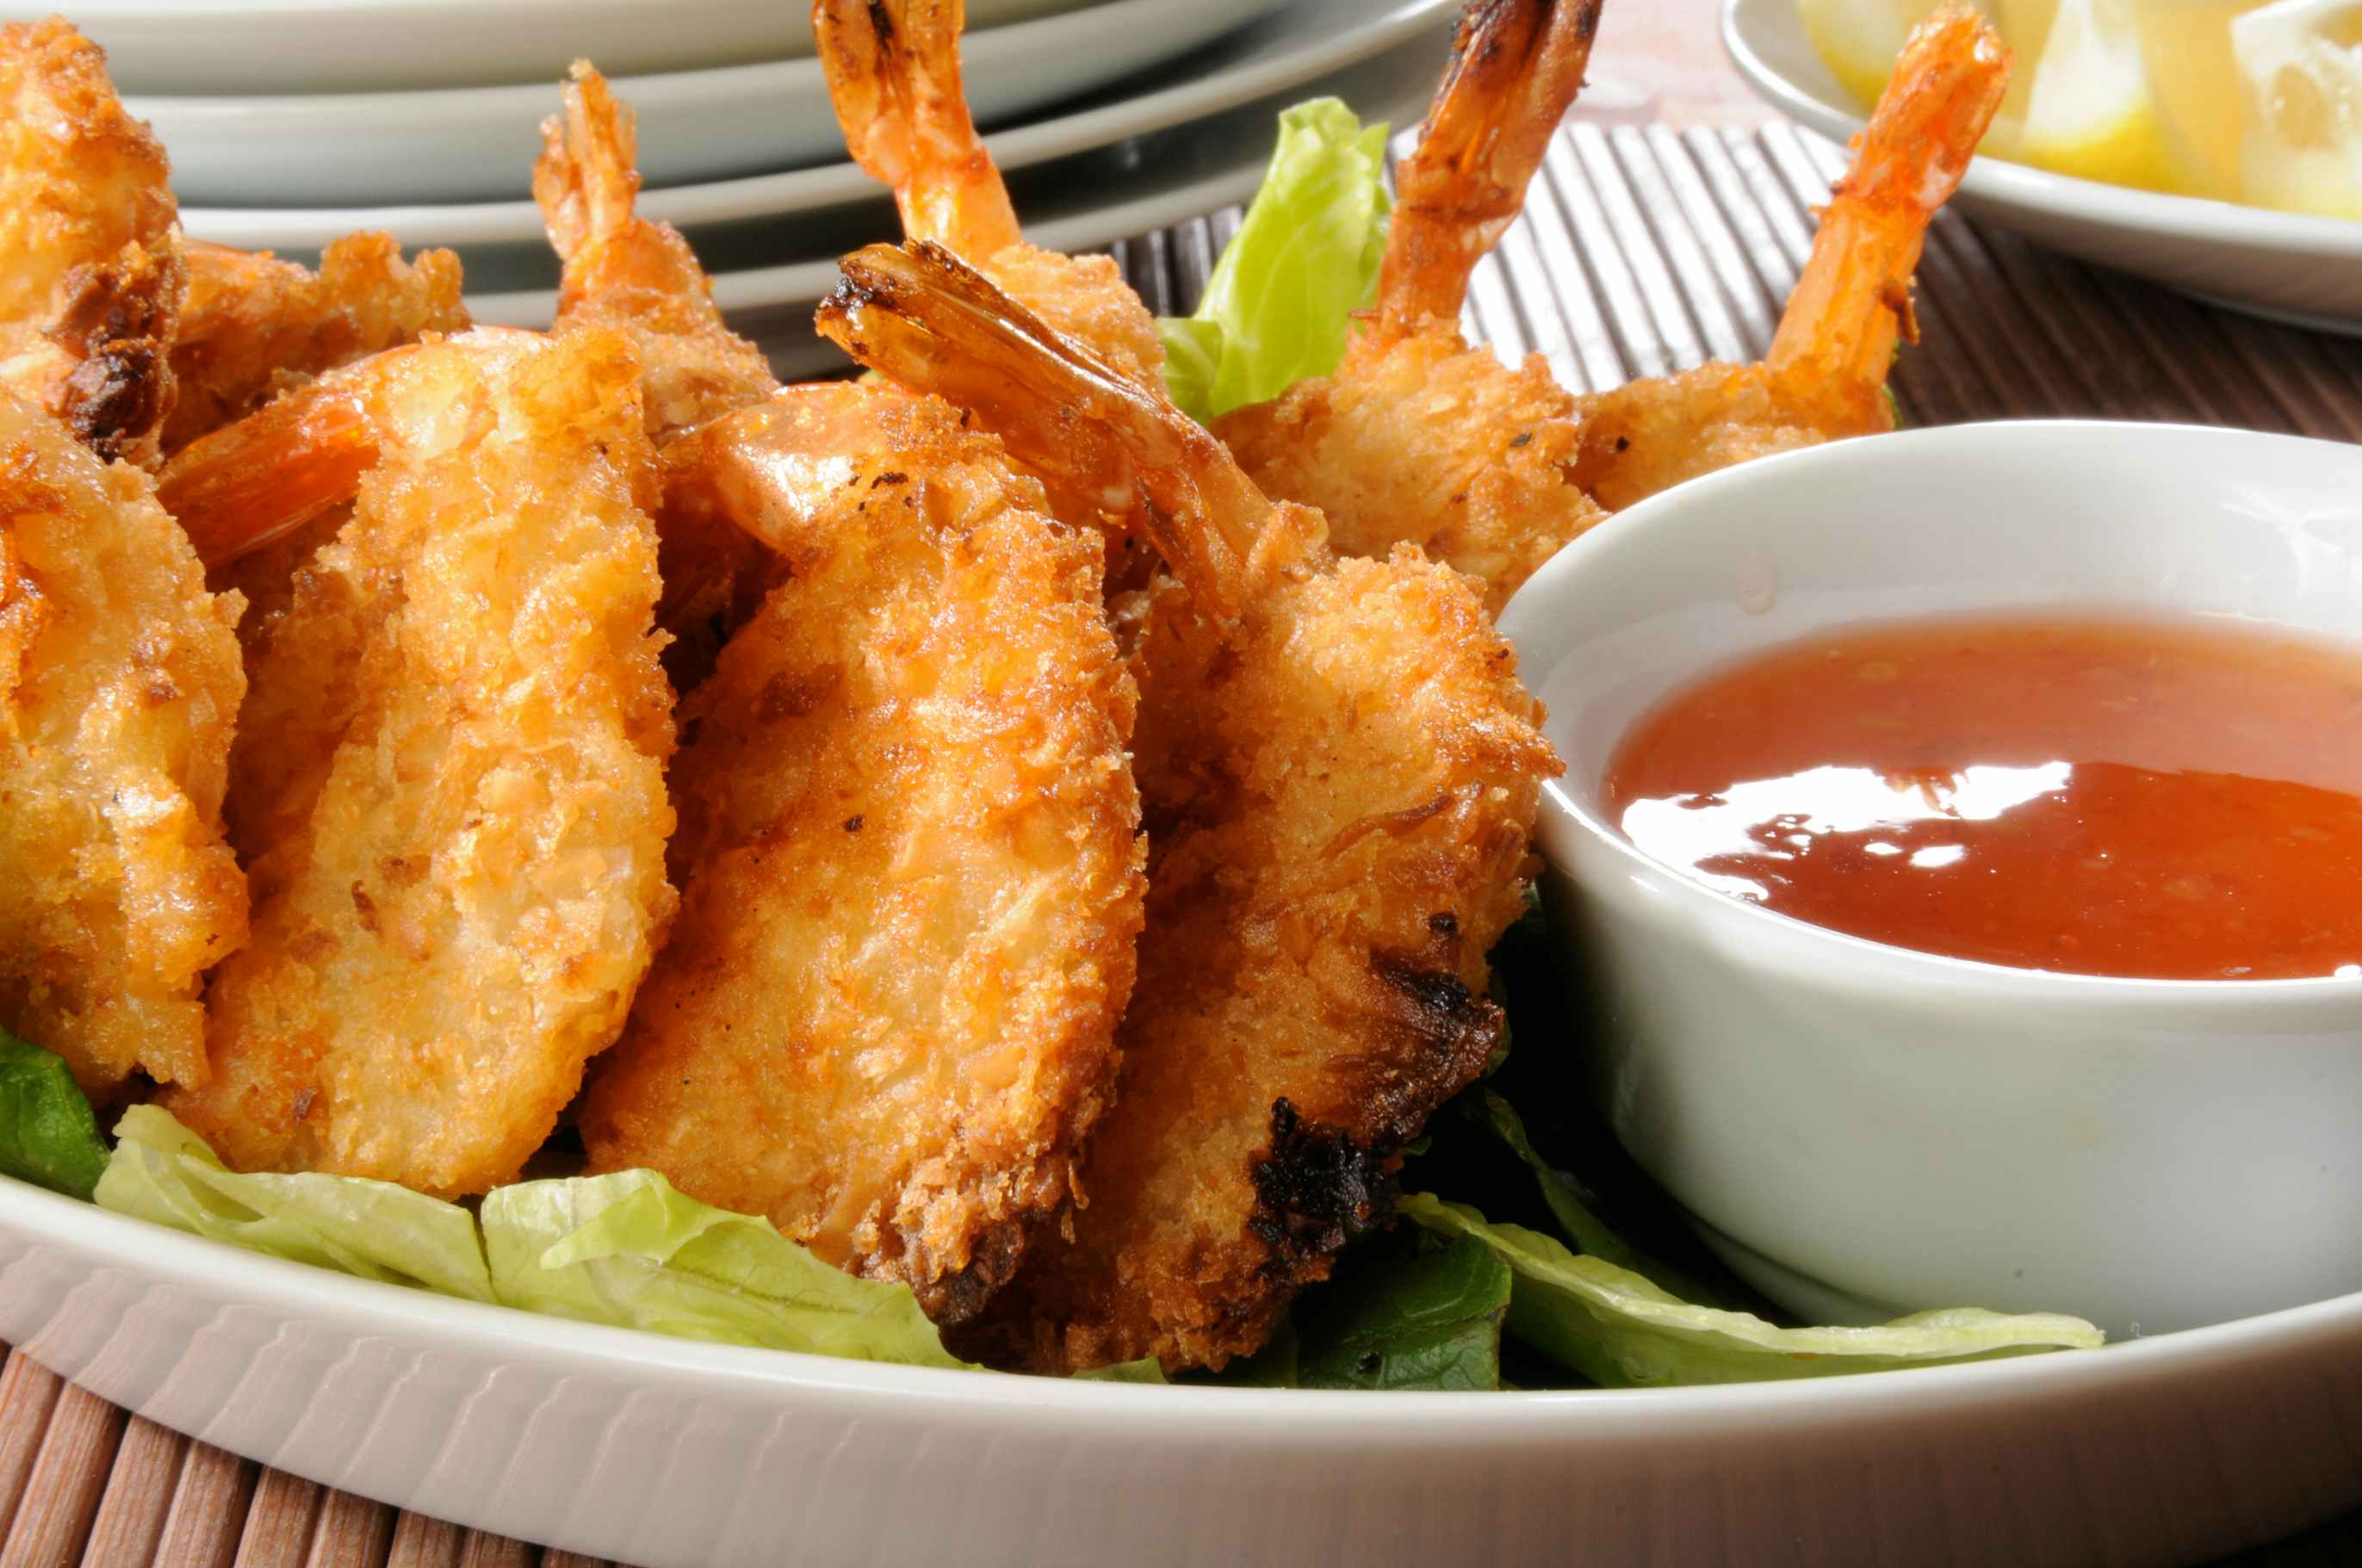 Coconut Shrimp plated next to a bowl of dipping sauce